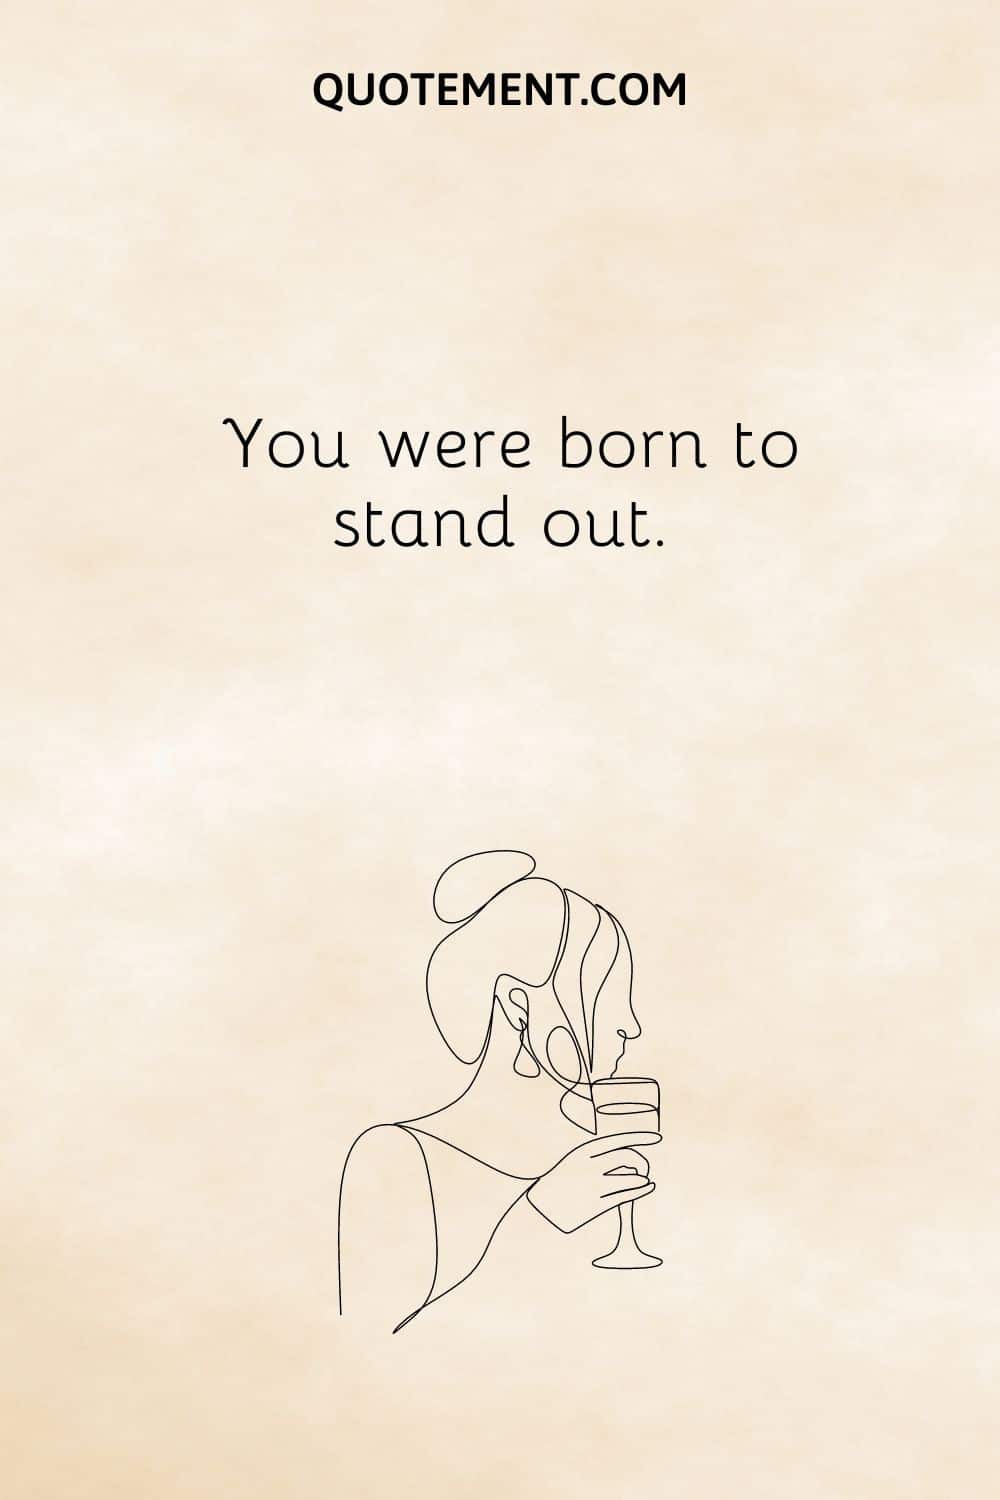 You were born to stand out.